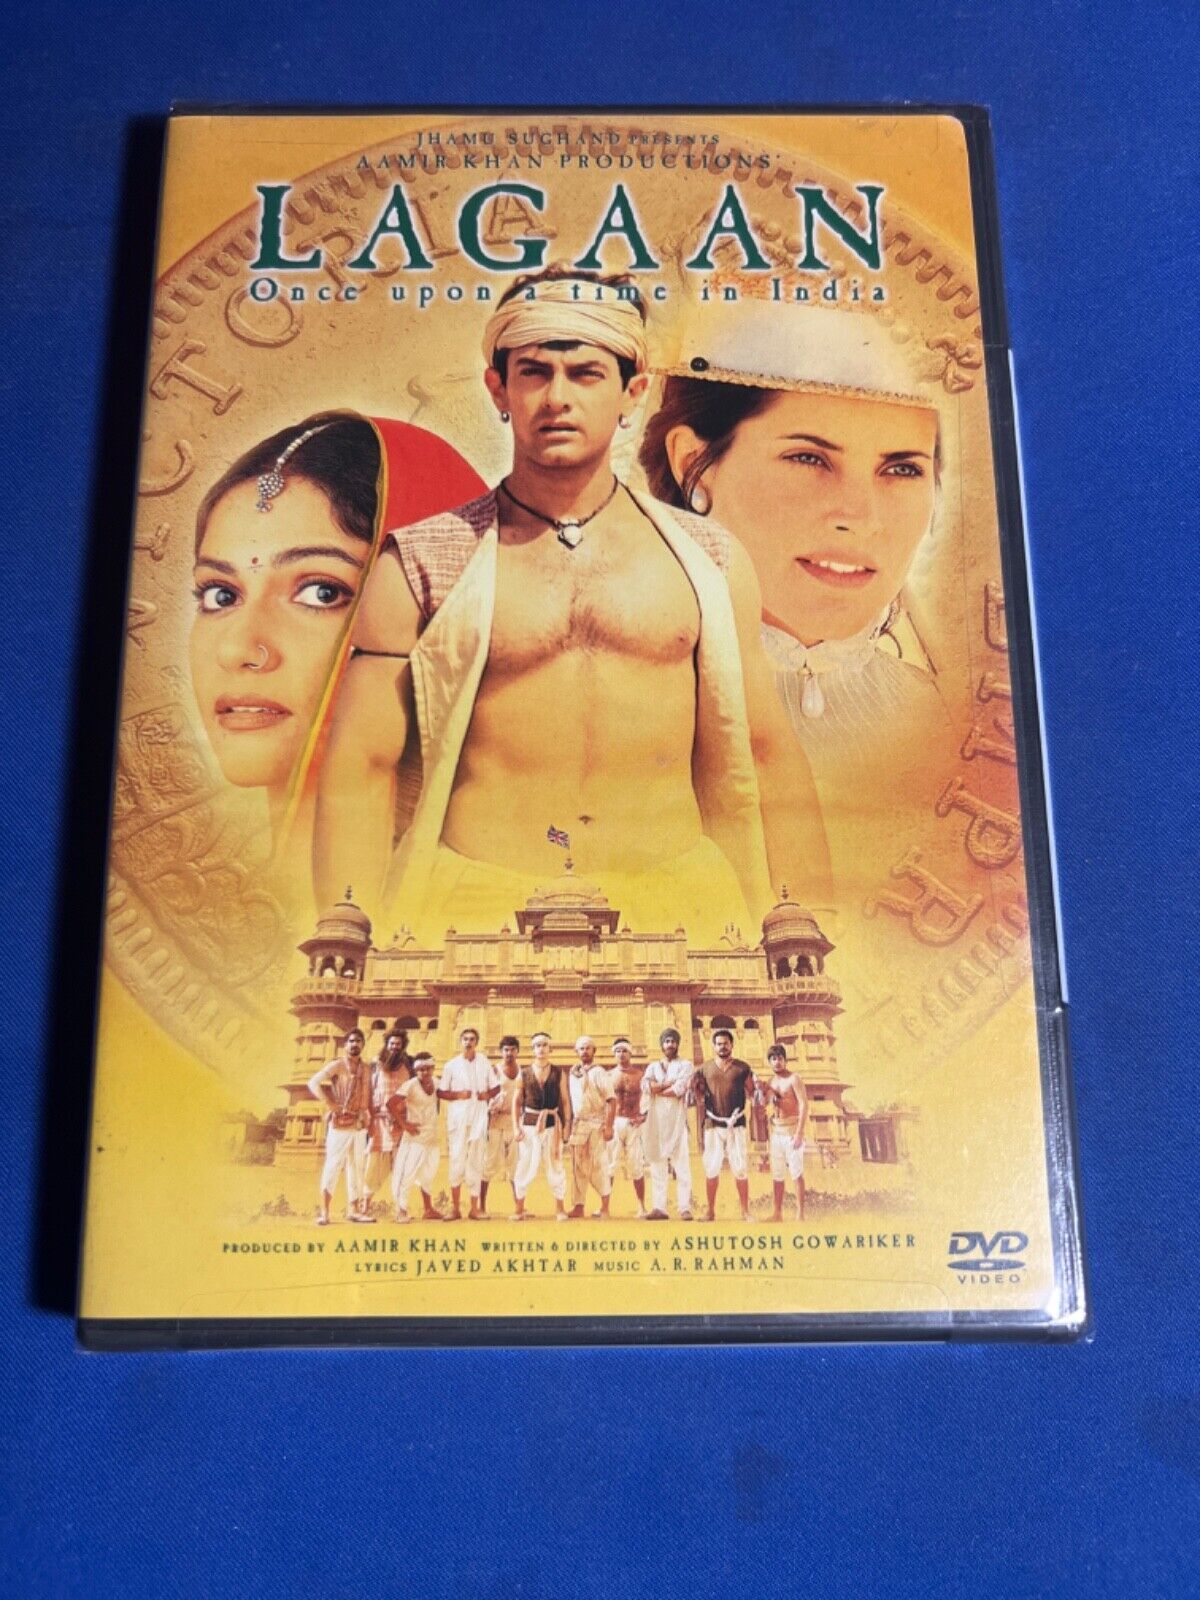 andy fairhurst recommends Watch Lagaan Online Free